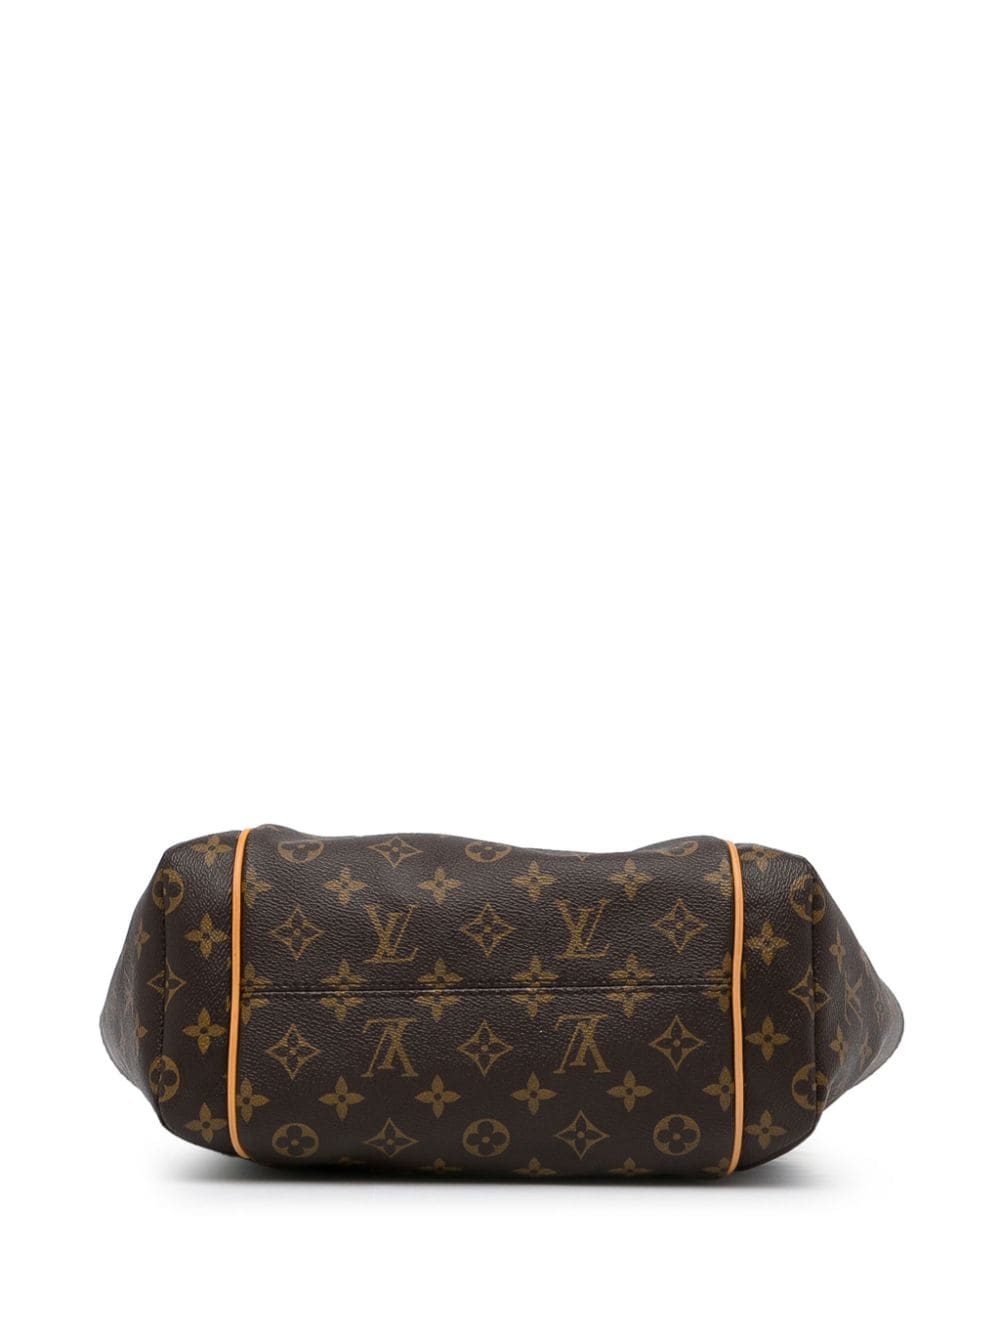 Louis Vuitton 2013 pre-owned Totally PM Tote Bag - Farfetch